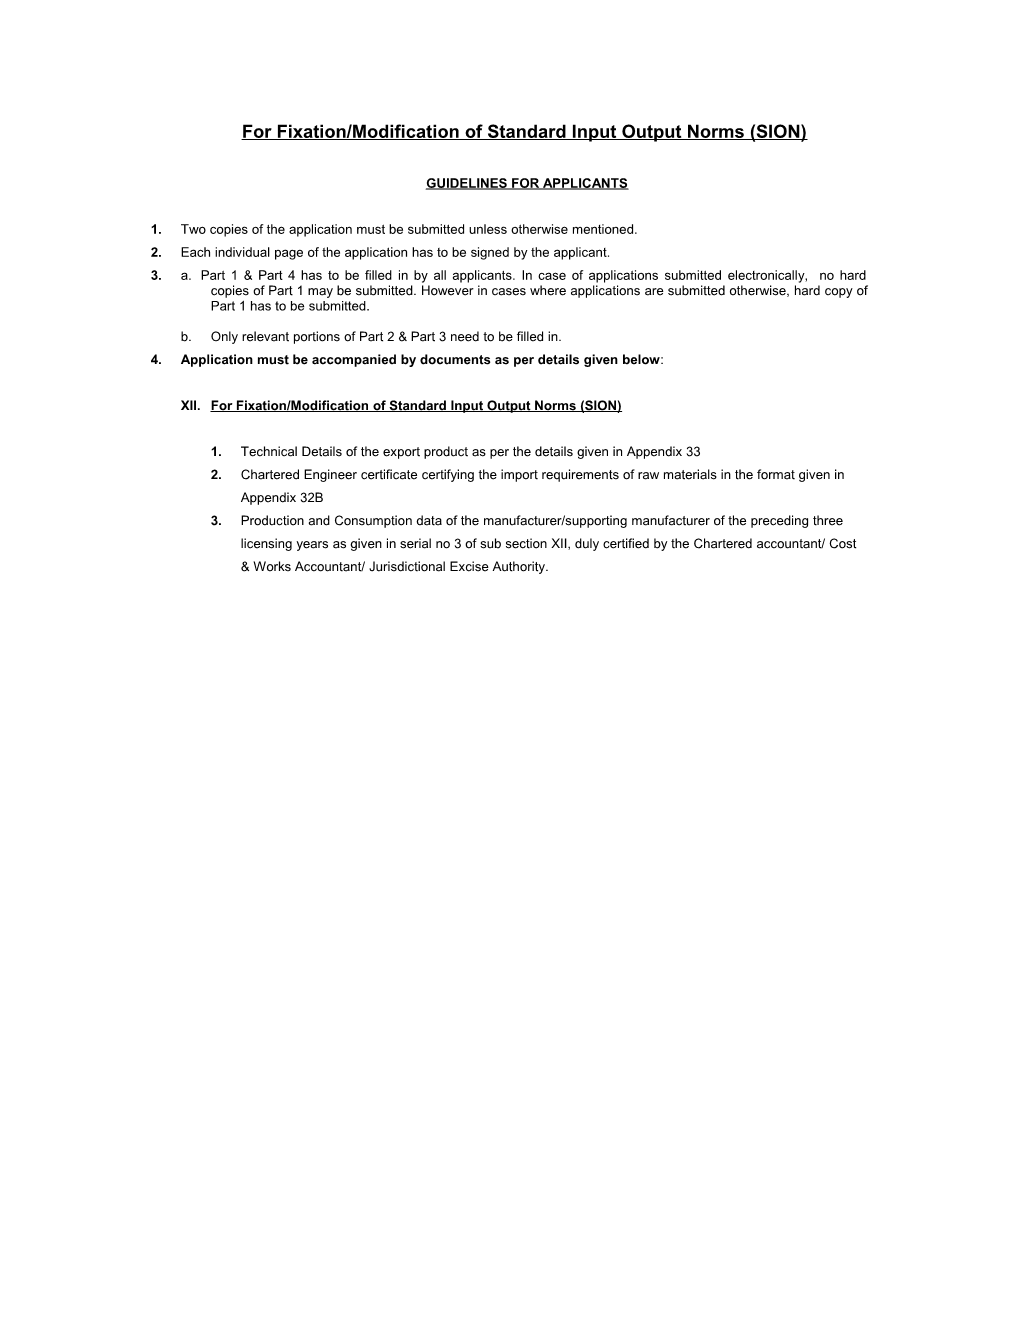 Guidelines for Applicants s3